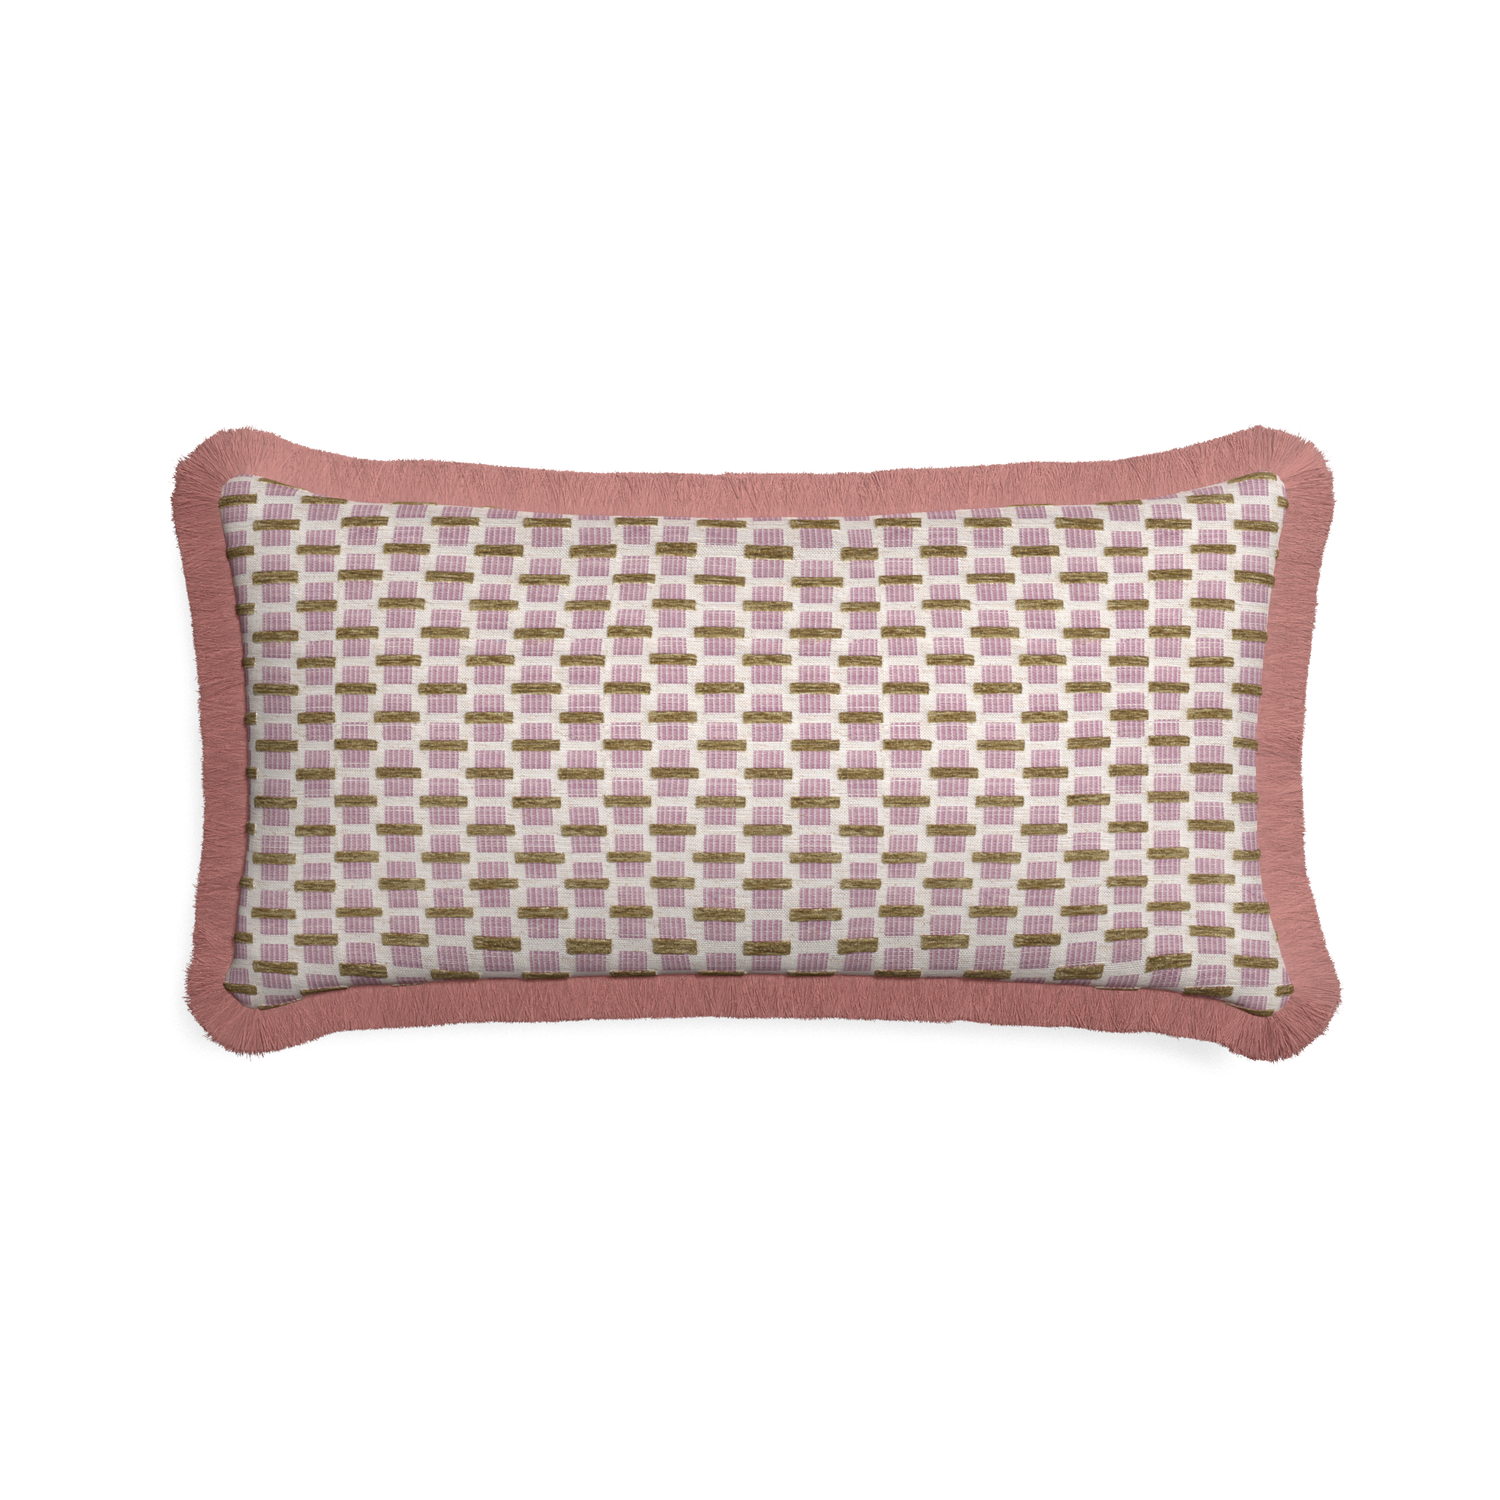 Midi-lumbar willow orchid custom pink geometric chenillepillow with d fringe on white background